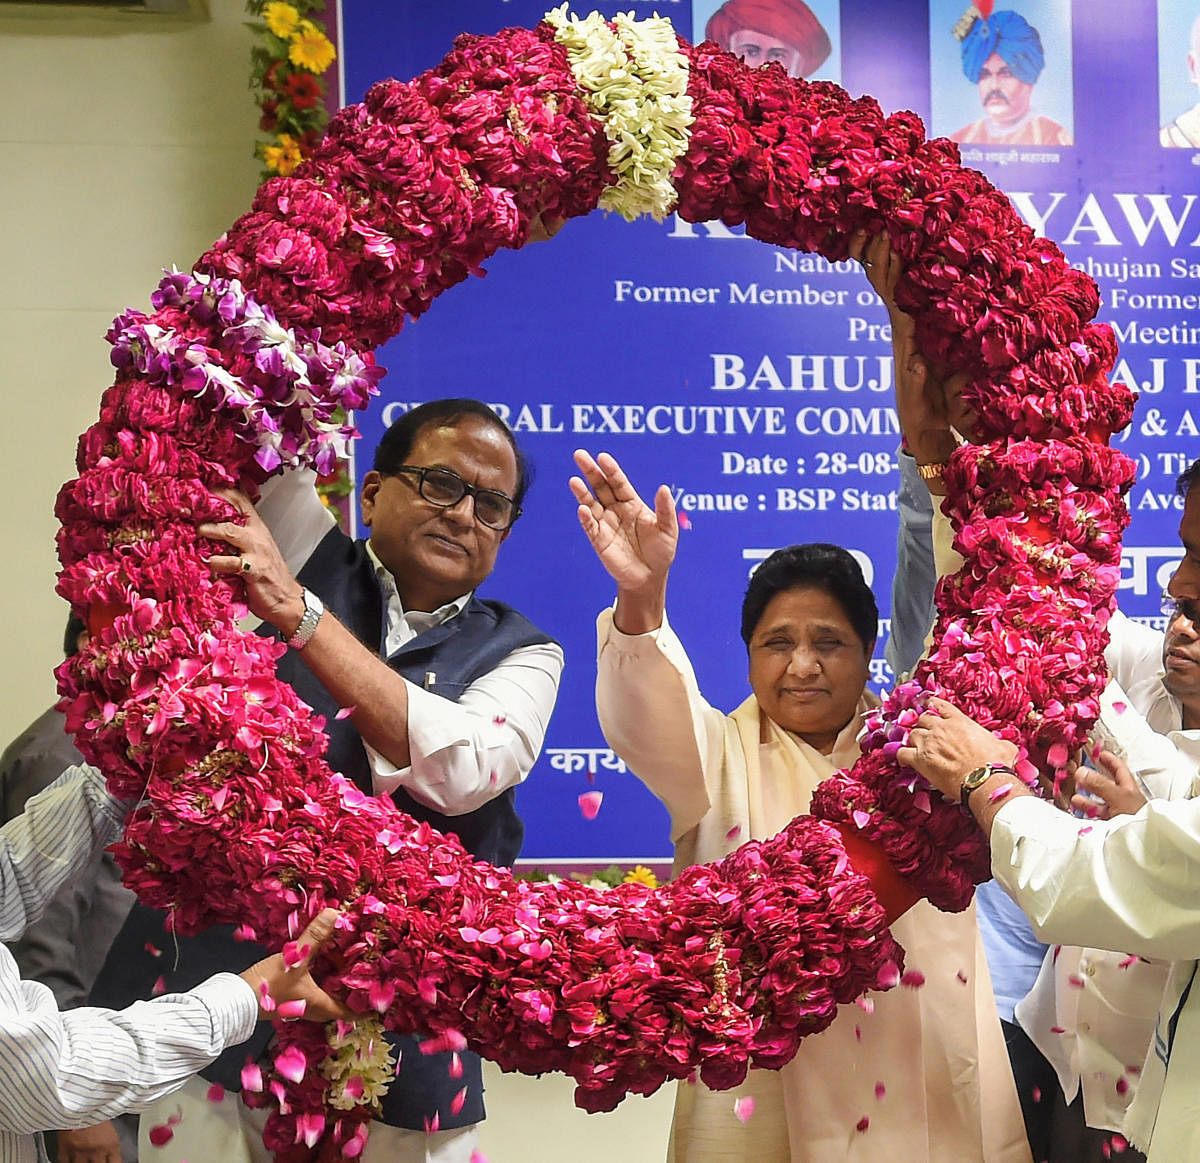 Lucknow: Bahujan Samaj Party (BSP) supremo Mayawati waves as she is garlanded by the party workers after being re-elected as the party president during a meeting, at BSP headquarters in Lucknow, Wednesday, Aug 28, 2019. BSP MP Satish Chandra Mishra is also seen. (PTI Photo/ Nand Kumar) (PTI8_28_2019_000039A)